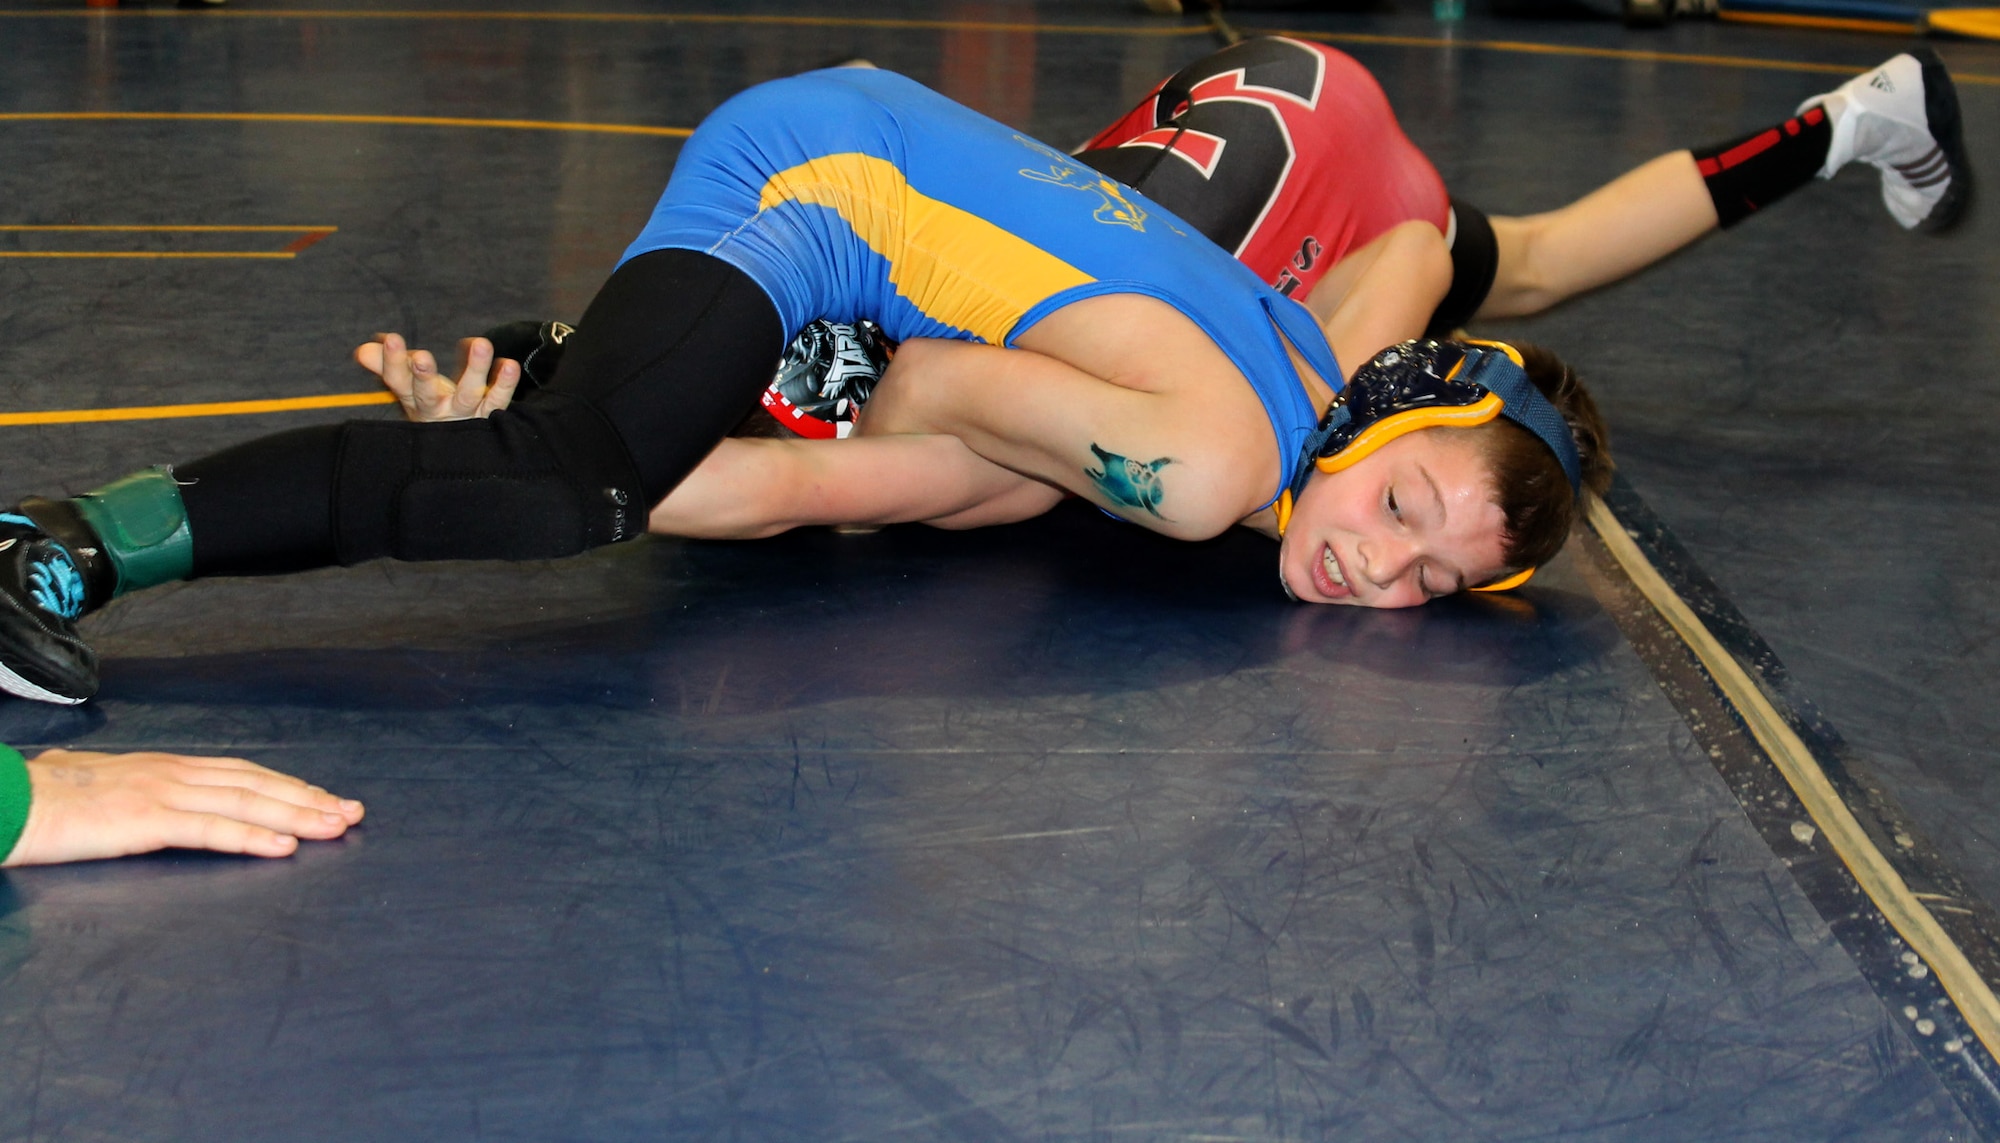 Francis Morrisey applies his favorite wrestling move, the arm bar hook, to an opponent in a match during the Caesar Rodney Rough Rider tournament March 2, 2013, at Caesar Rodney High School in Camden, Del. Morrisey, who won the Eastern Nationals Wrestling Championship in May, finished 2013 season with a 134-17 record winning 38 tournaments. (Courtesy photo)